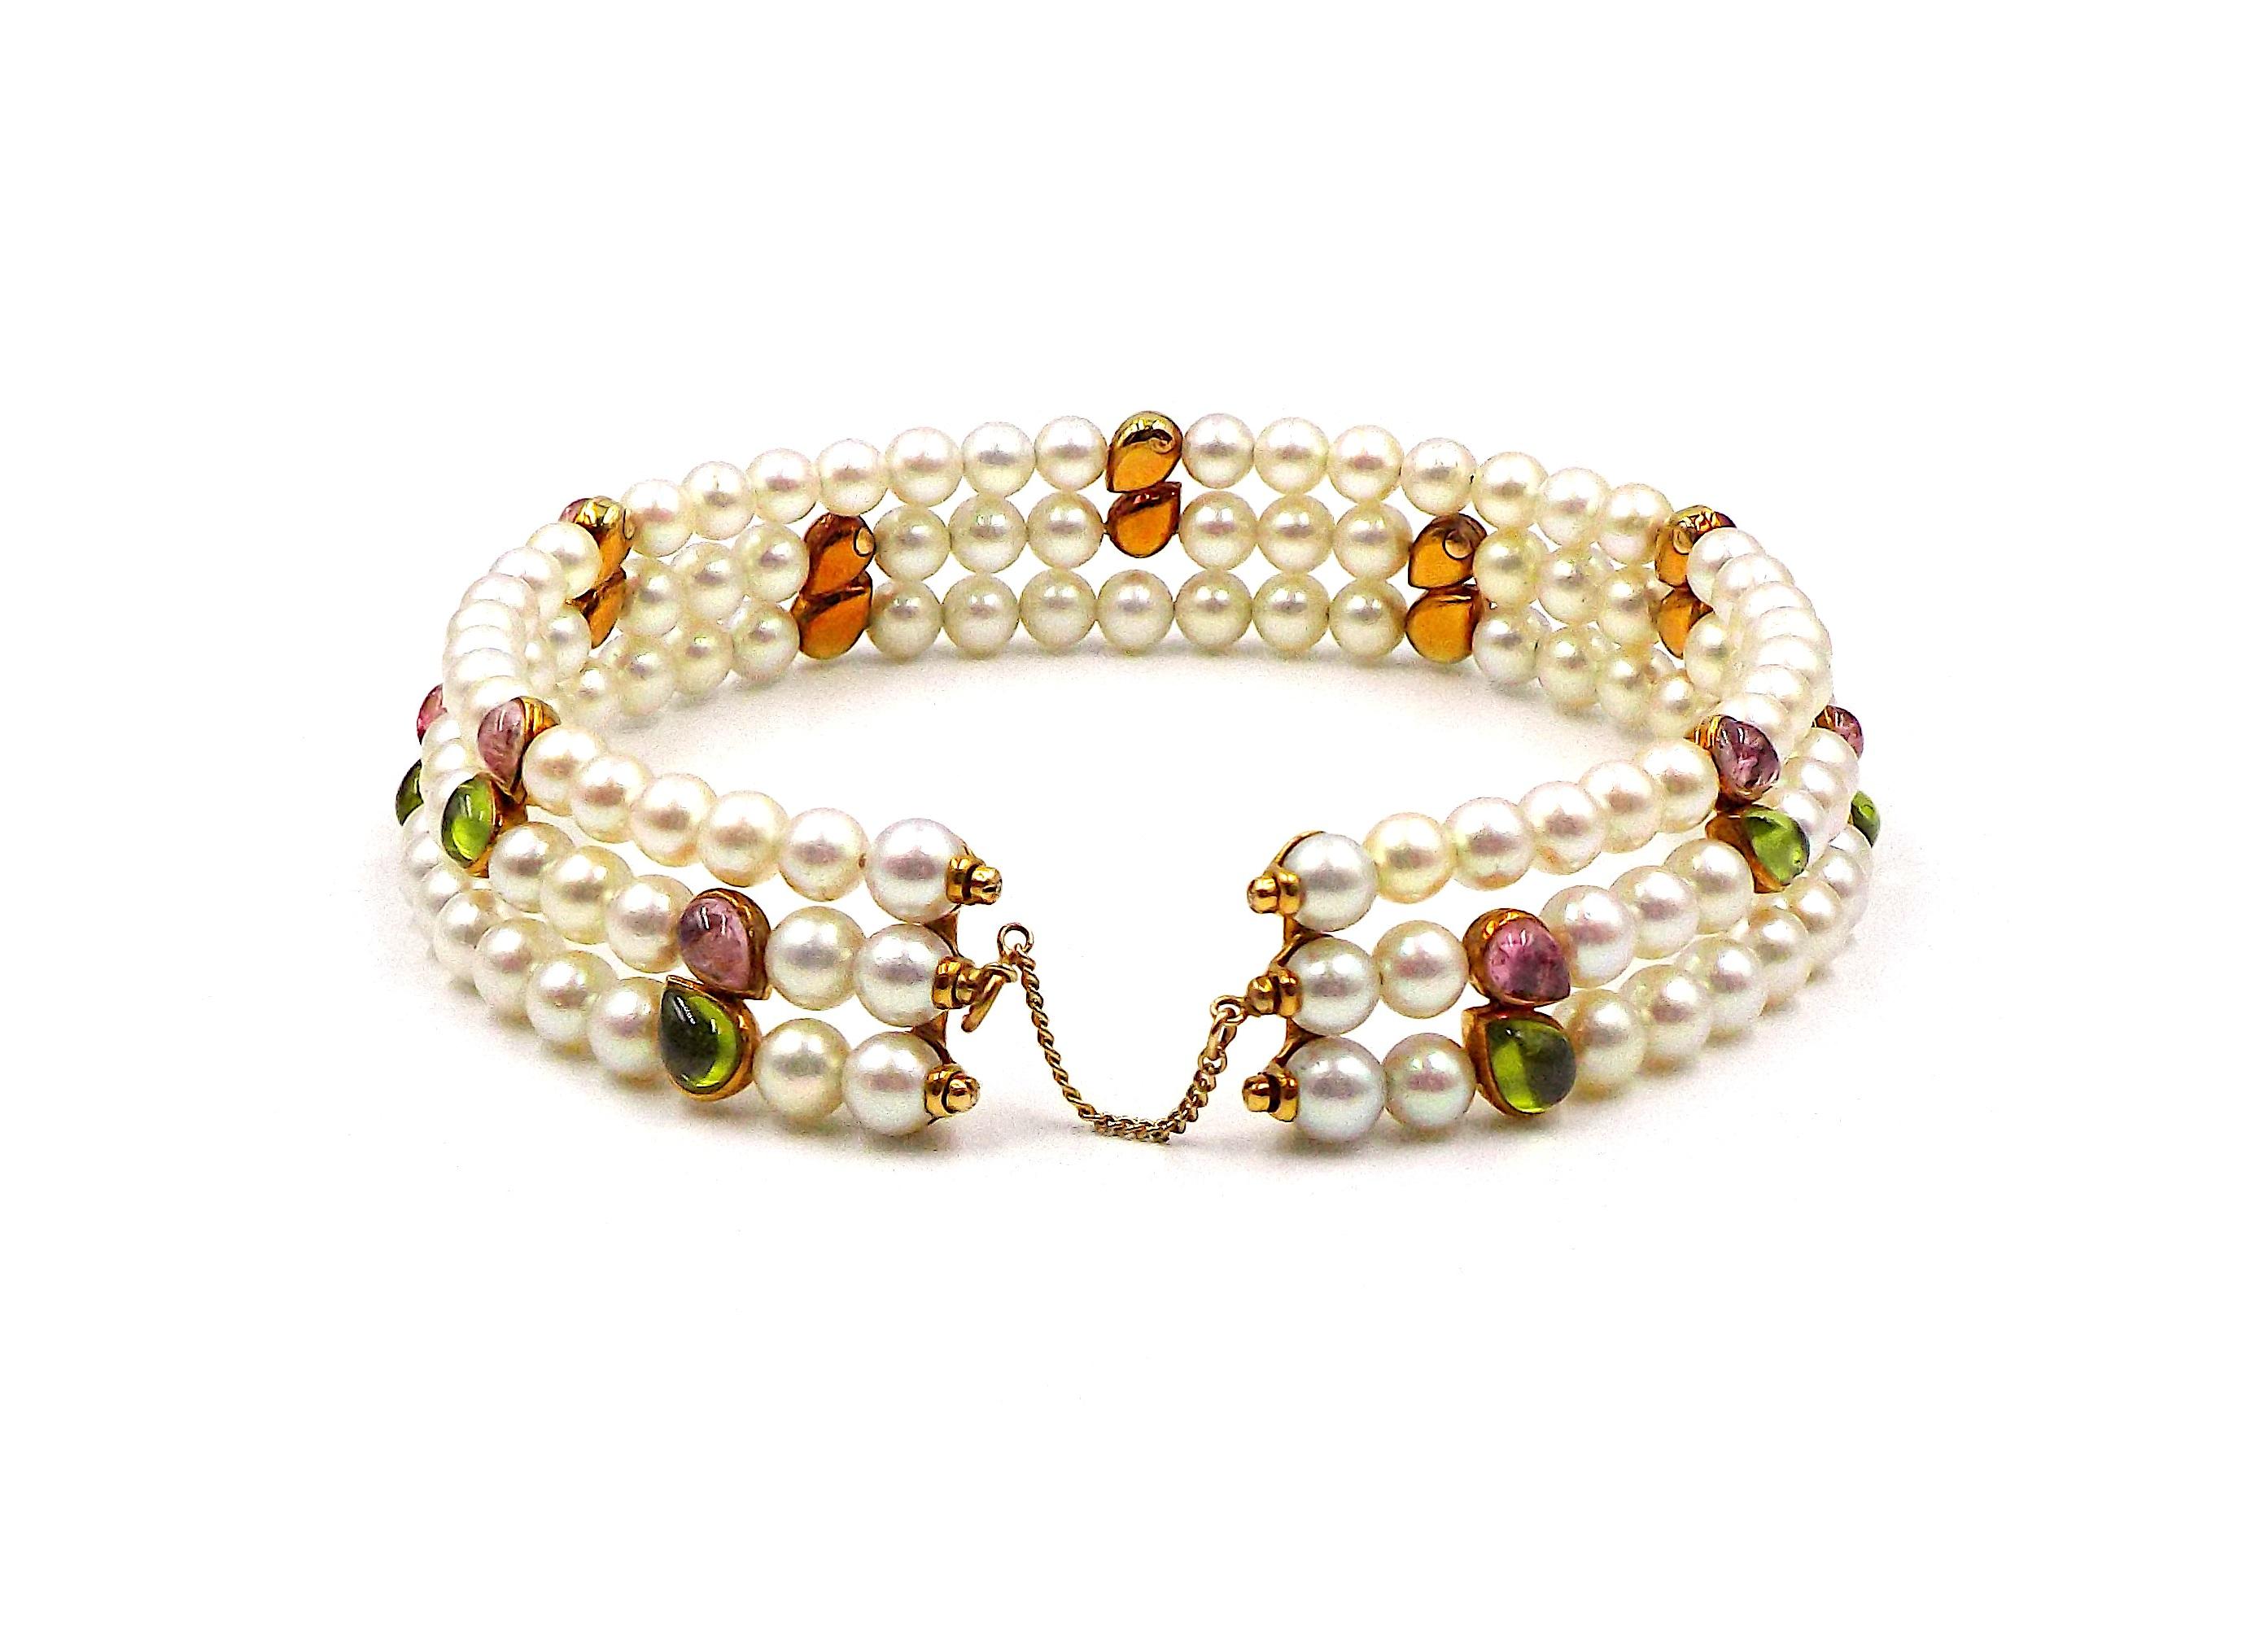 A semi-flexible choker containing three rows of pearls measuring approximately 6.50-7.00 mm in diameter, interspersed with yellow gold stations containing pear cabochon pink tourmalines and peridots, together with a matching semi-flexible cuff